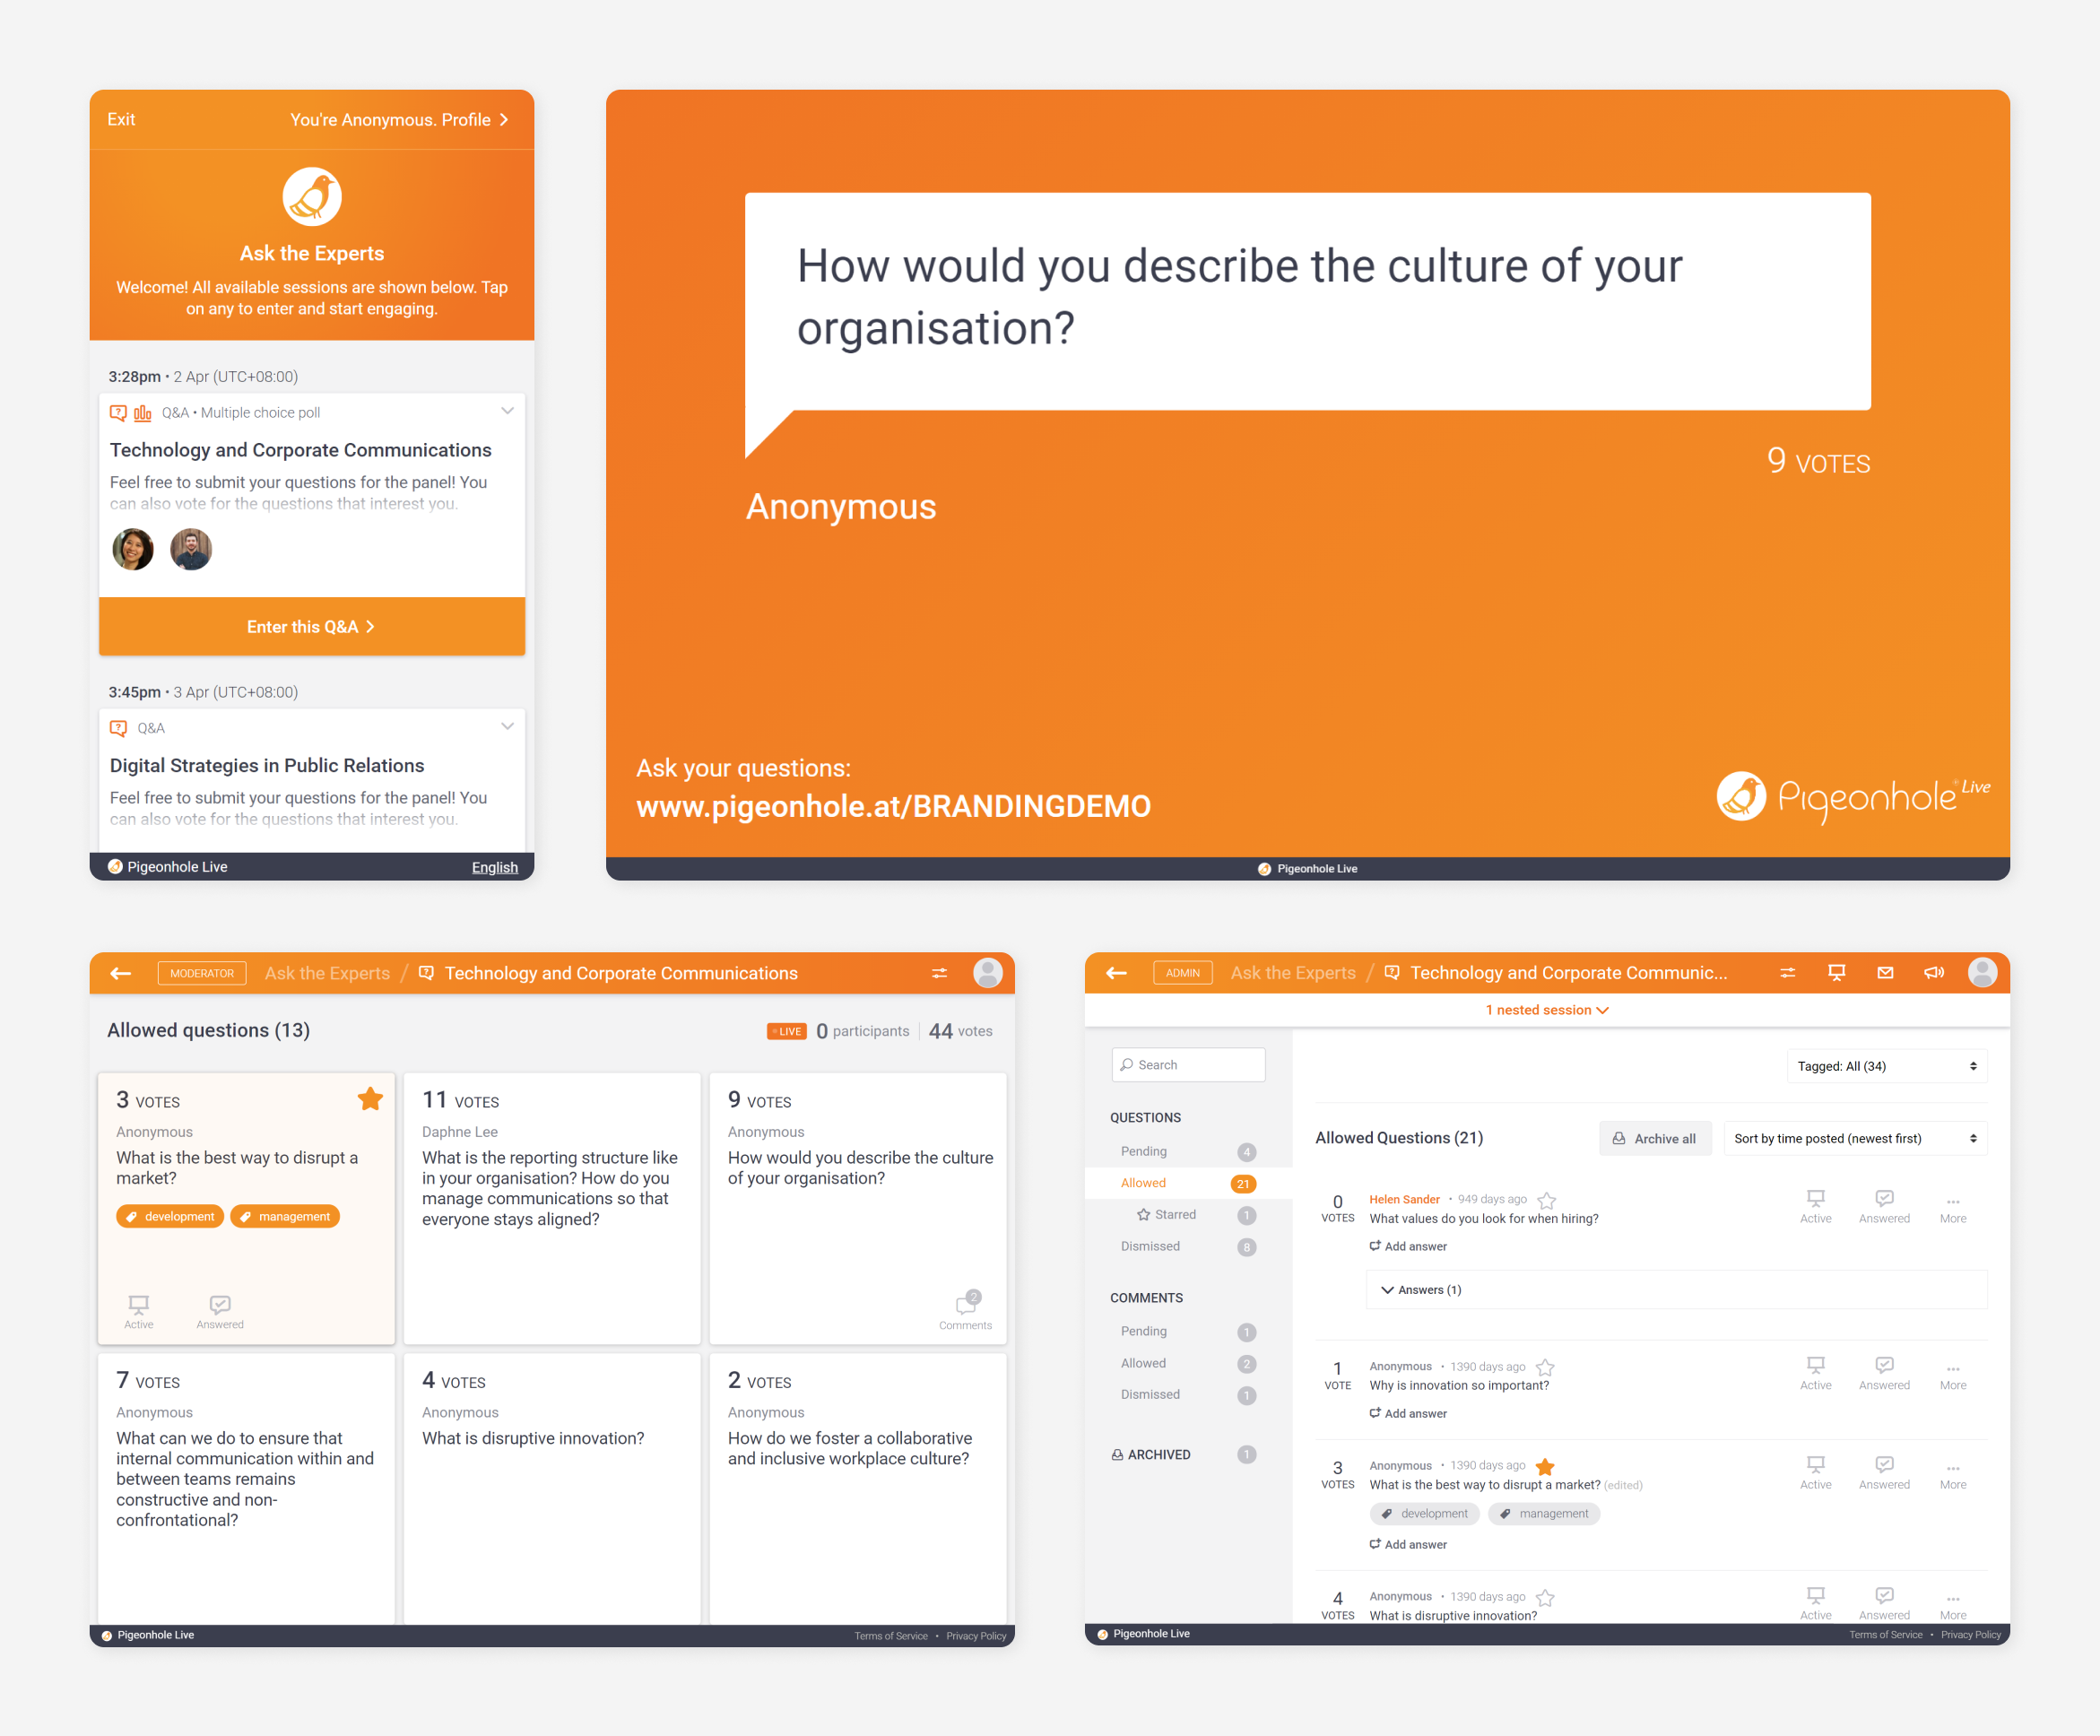 Pigeonhole Live interfaces branded in orange